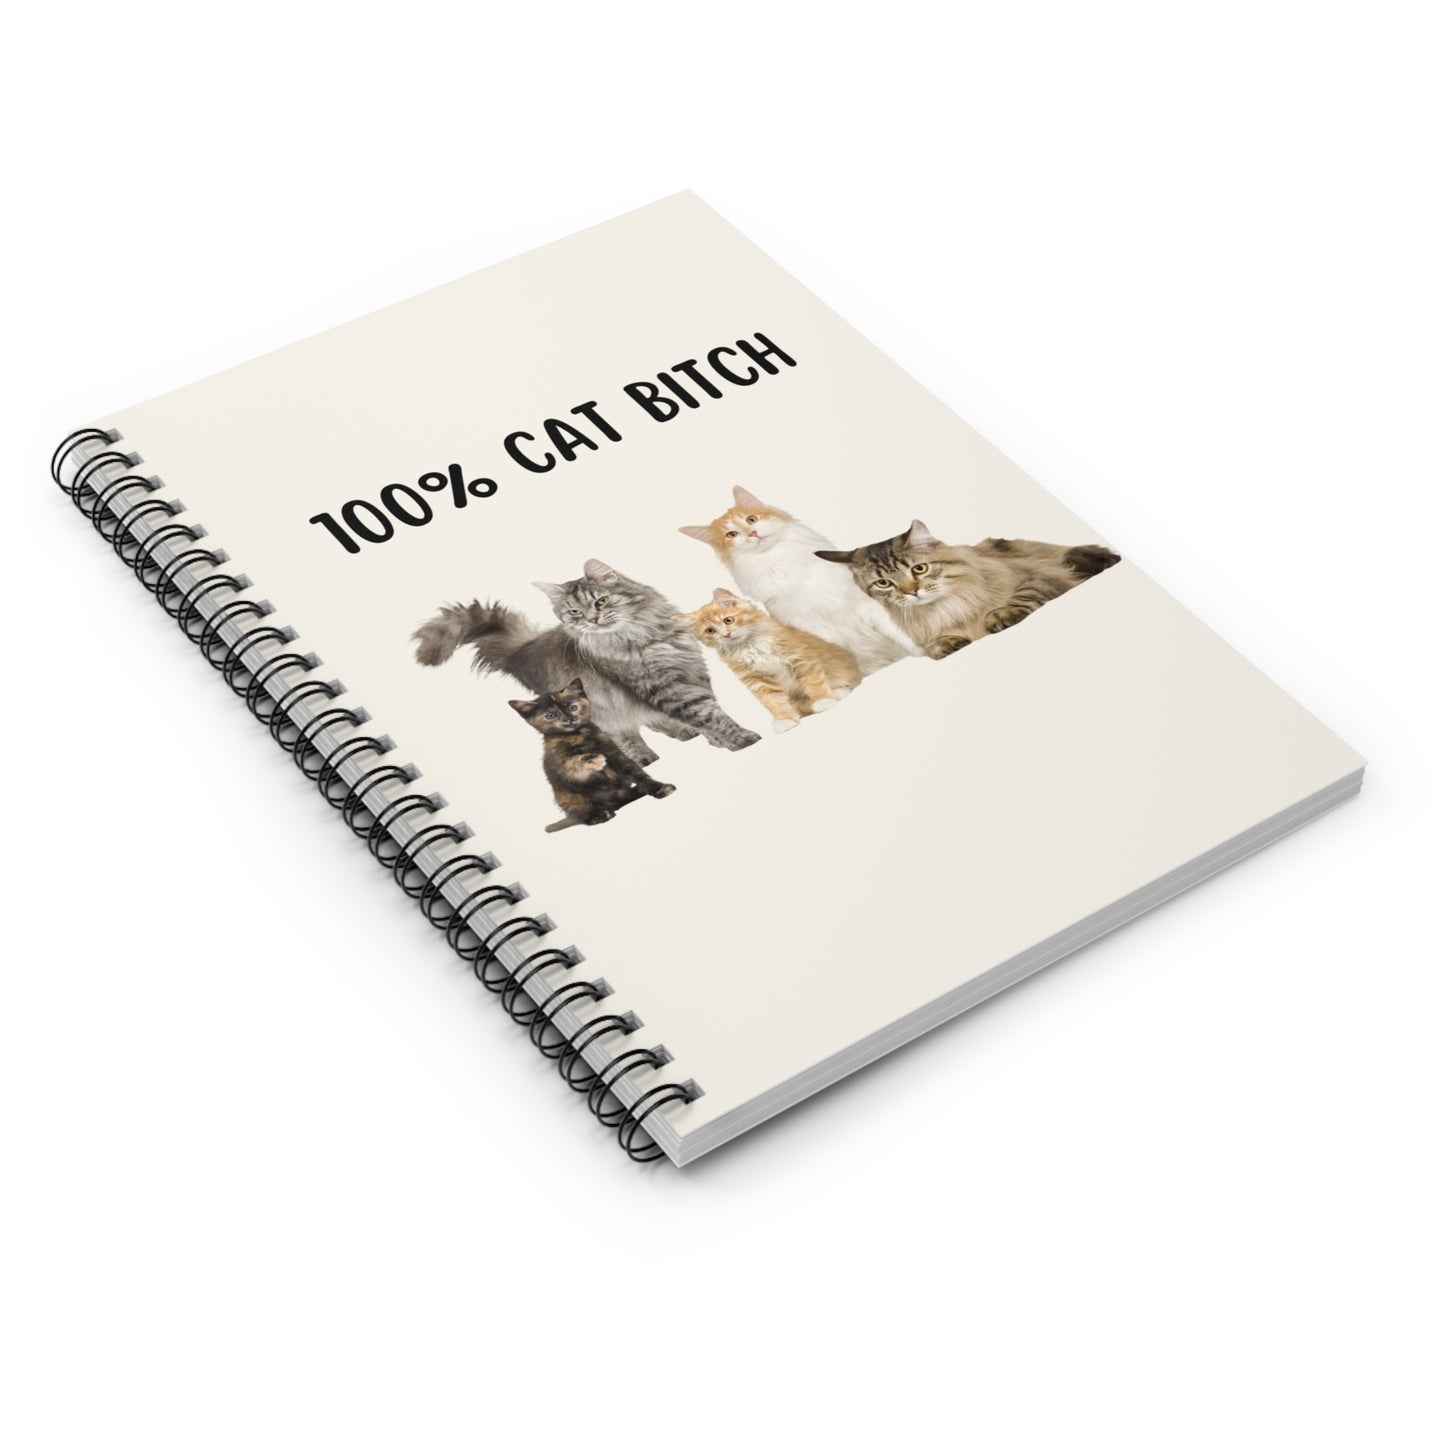 100% Cat B*tch Notebook, Funny Cat Notebook, Coworker Office Gifts, Cats Journal, Kawaii Cat Stationery